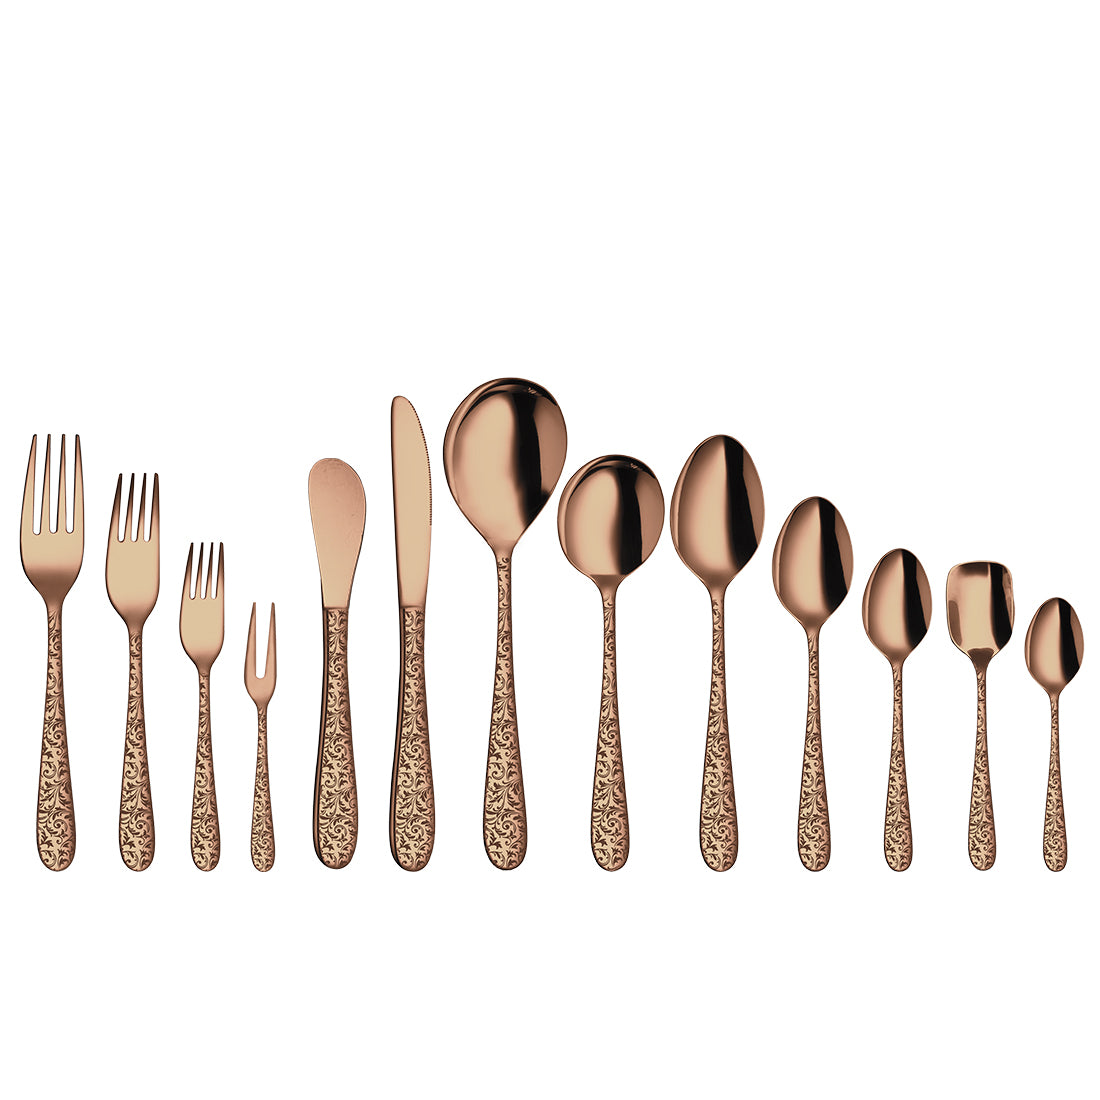 Stainless Steel Cutlery with Rose Gold PVD Coating & Laser Jasmine